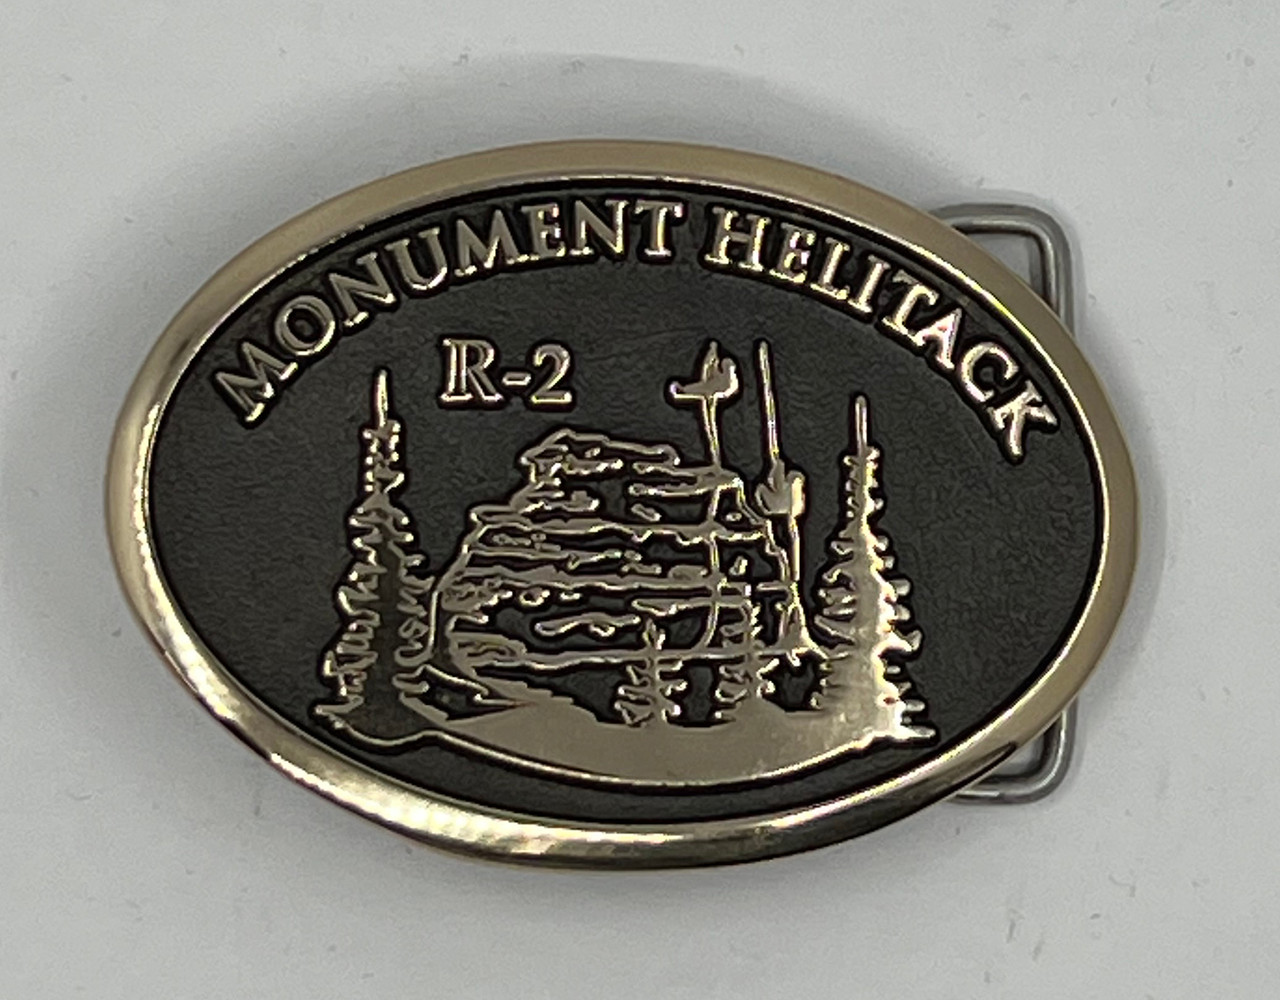 Monument Helitack Buckle (RESTRICTED)